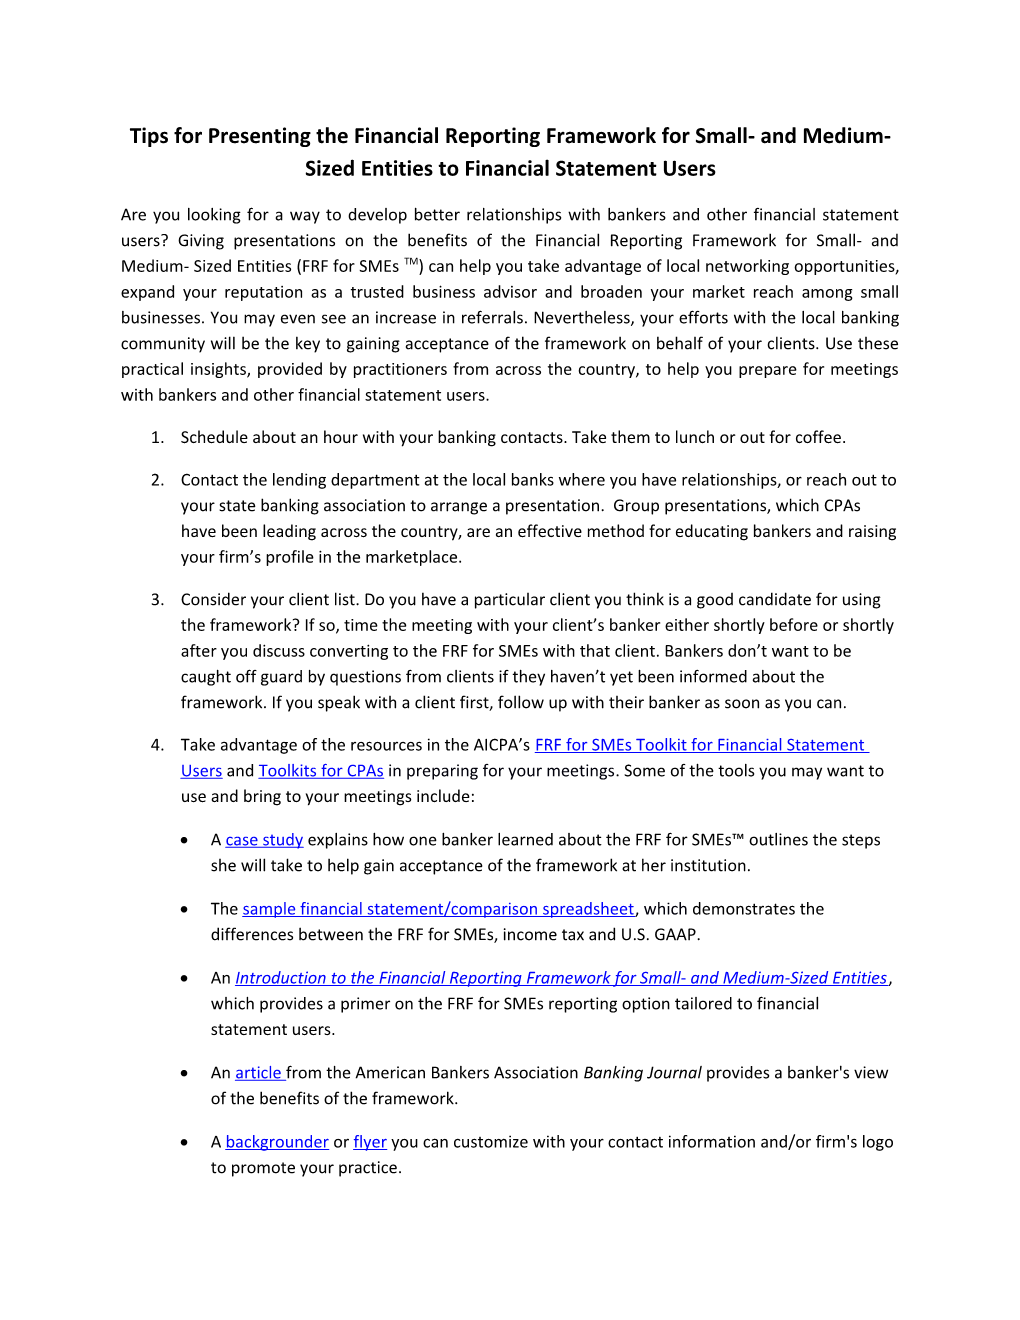 Tips for Presenting the FRF for Smes to Financial Statement Users